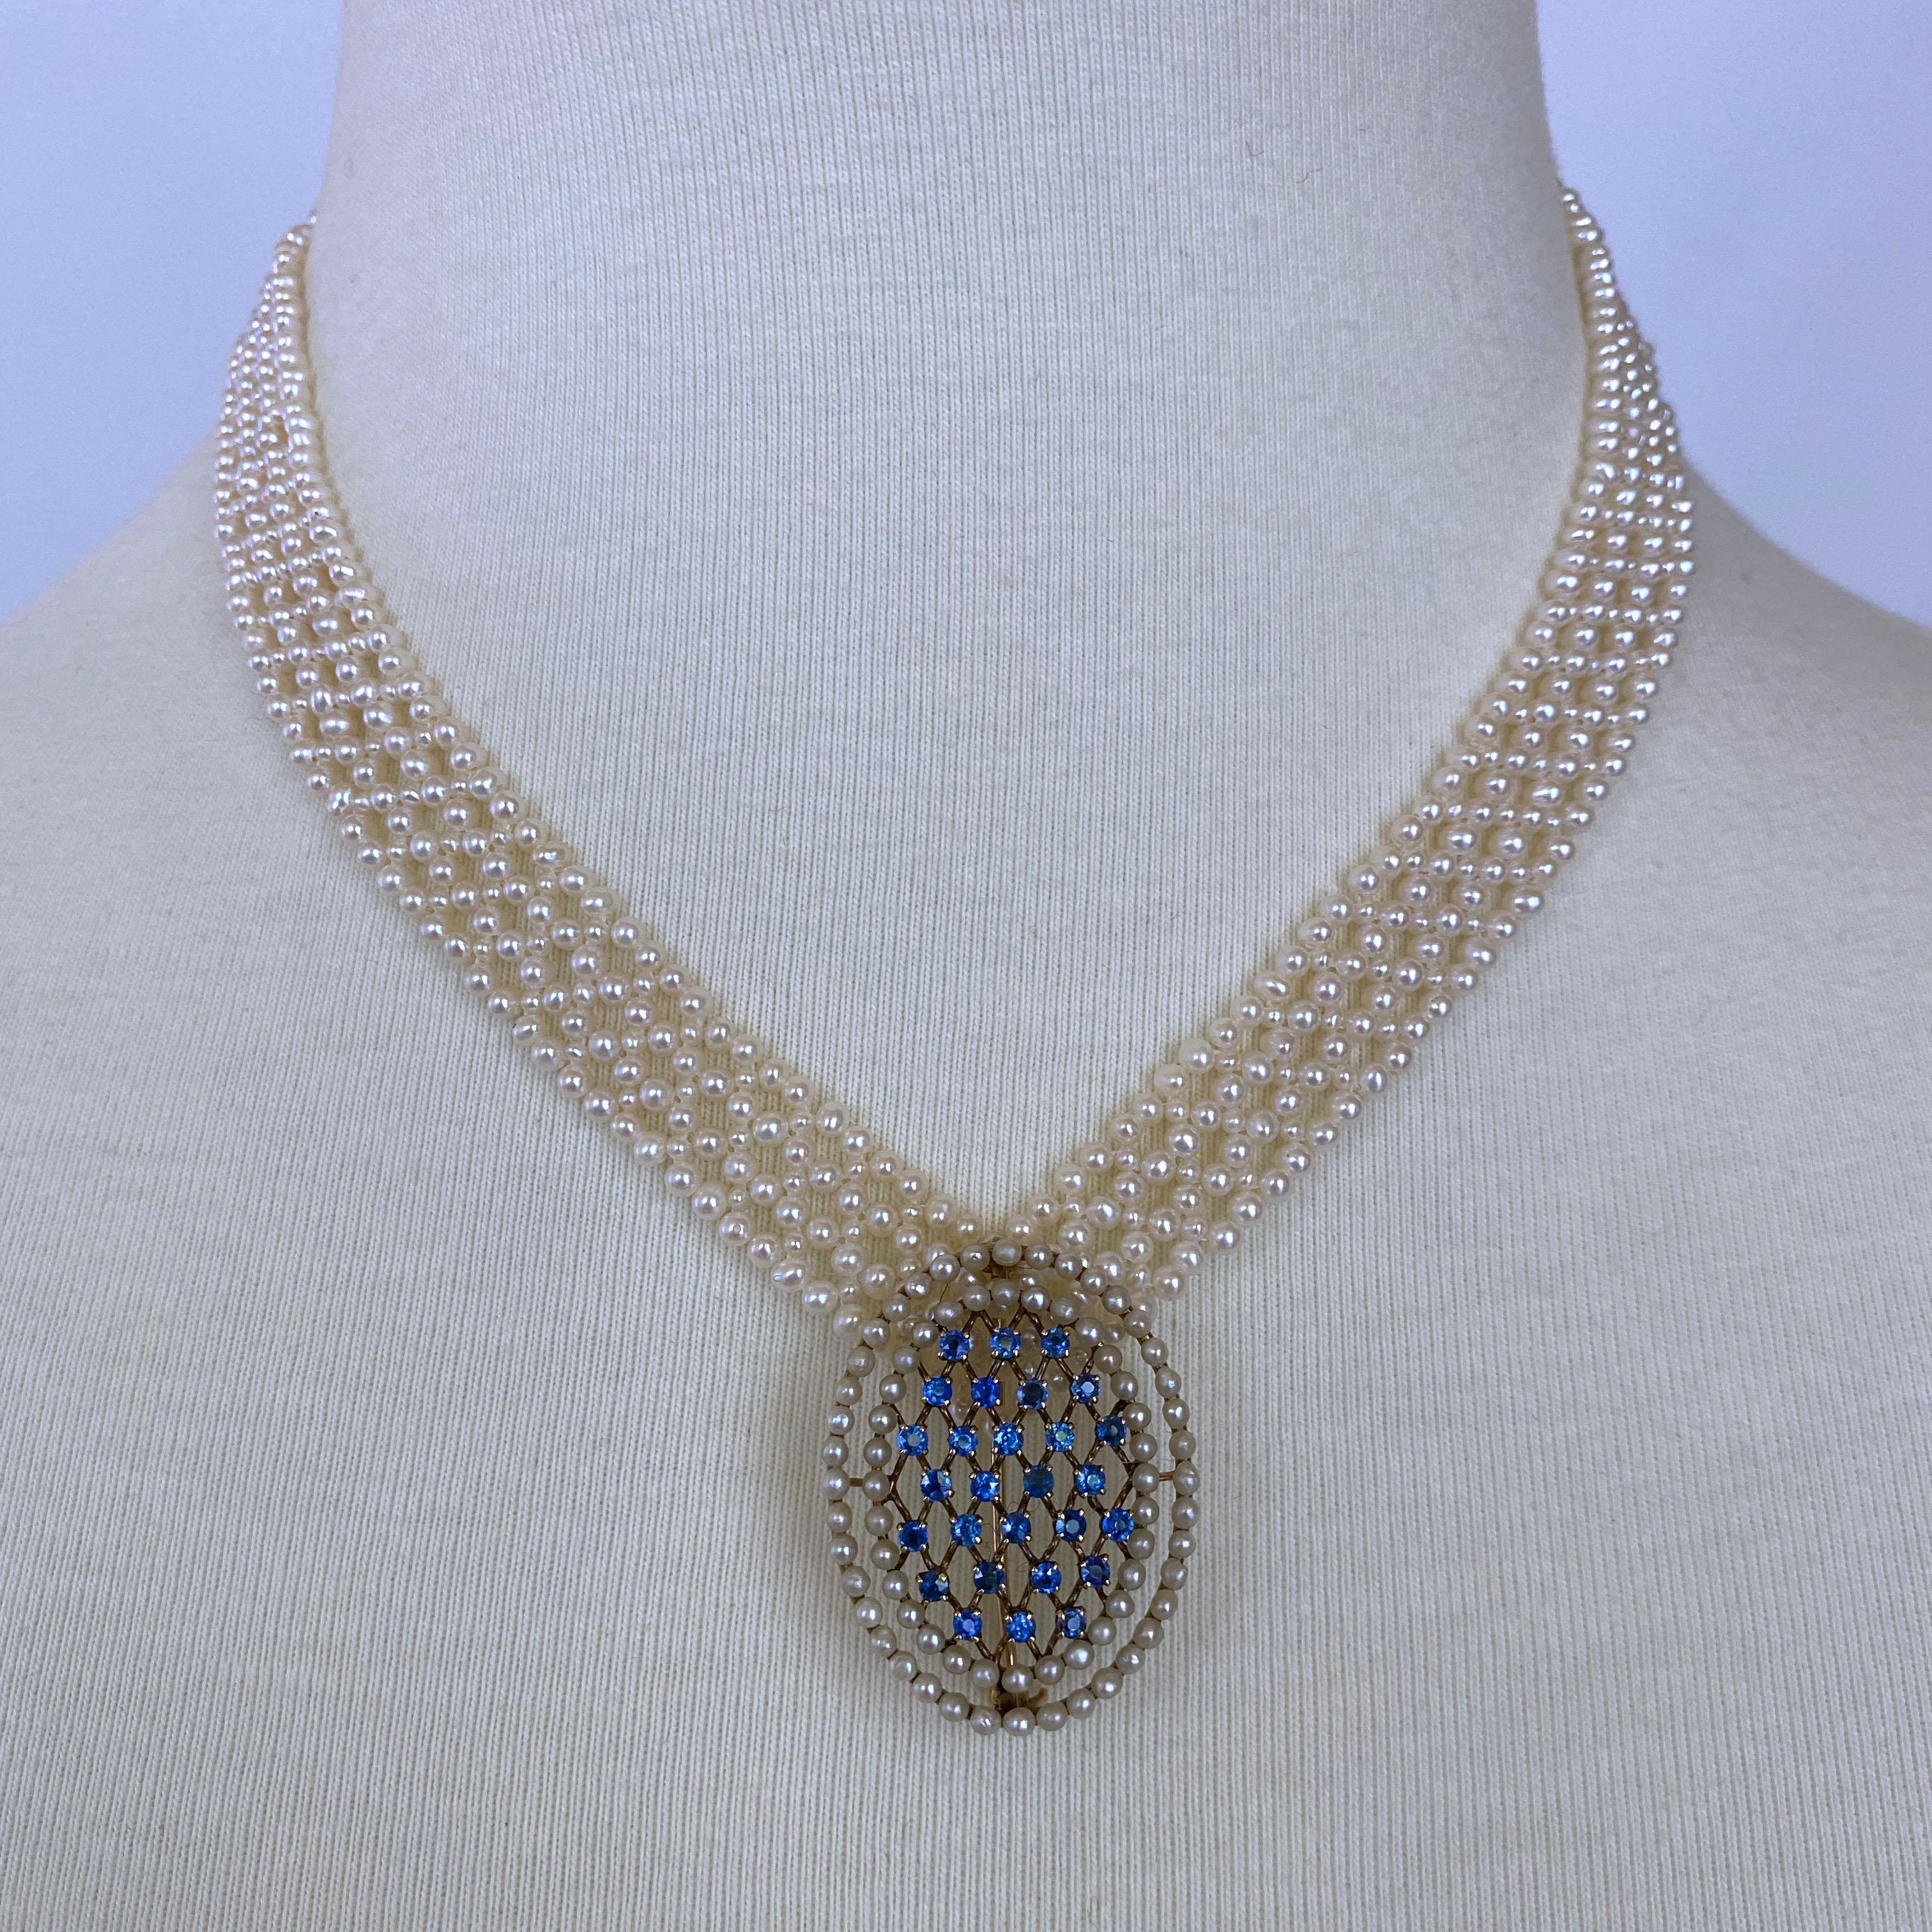 Marina J. Pearl woven Necklace with 14k Vintage Blue Sapphire & Pearl Brooch For Sale 1